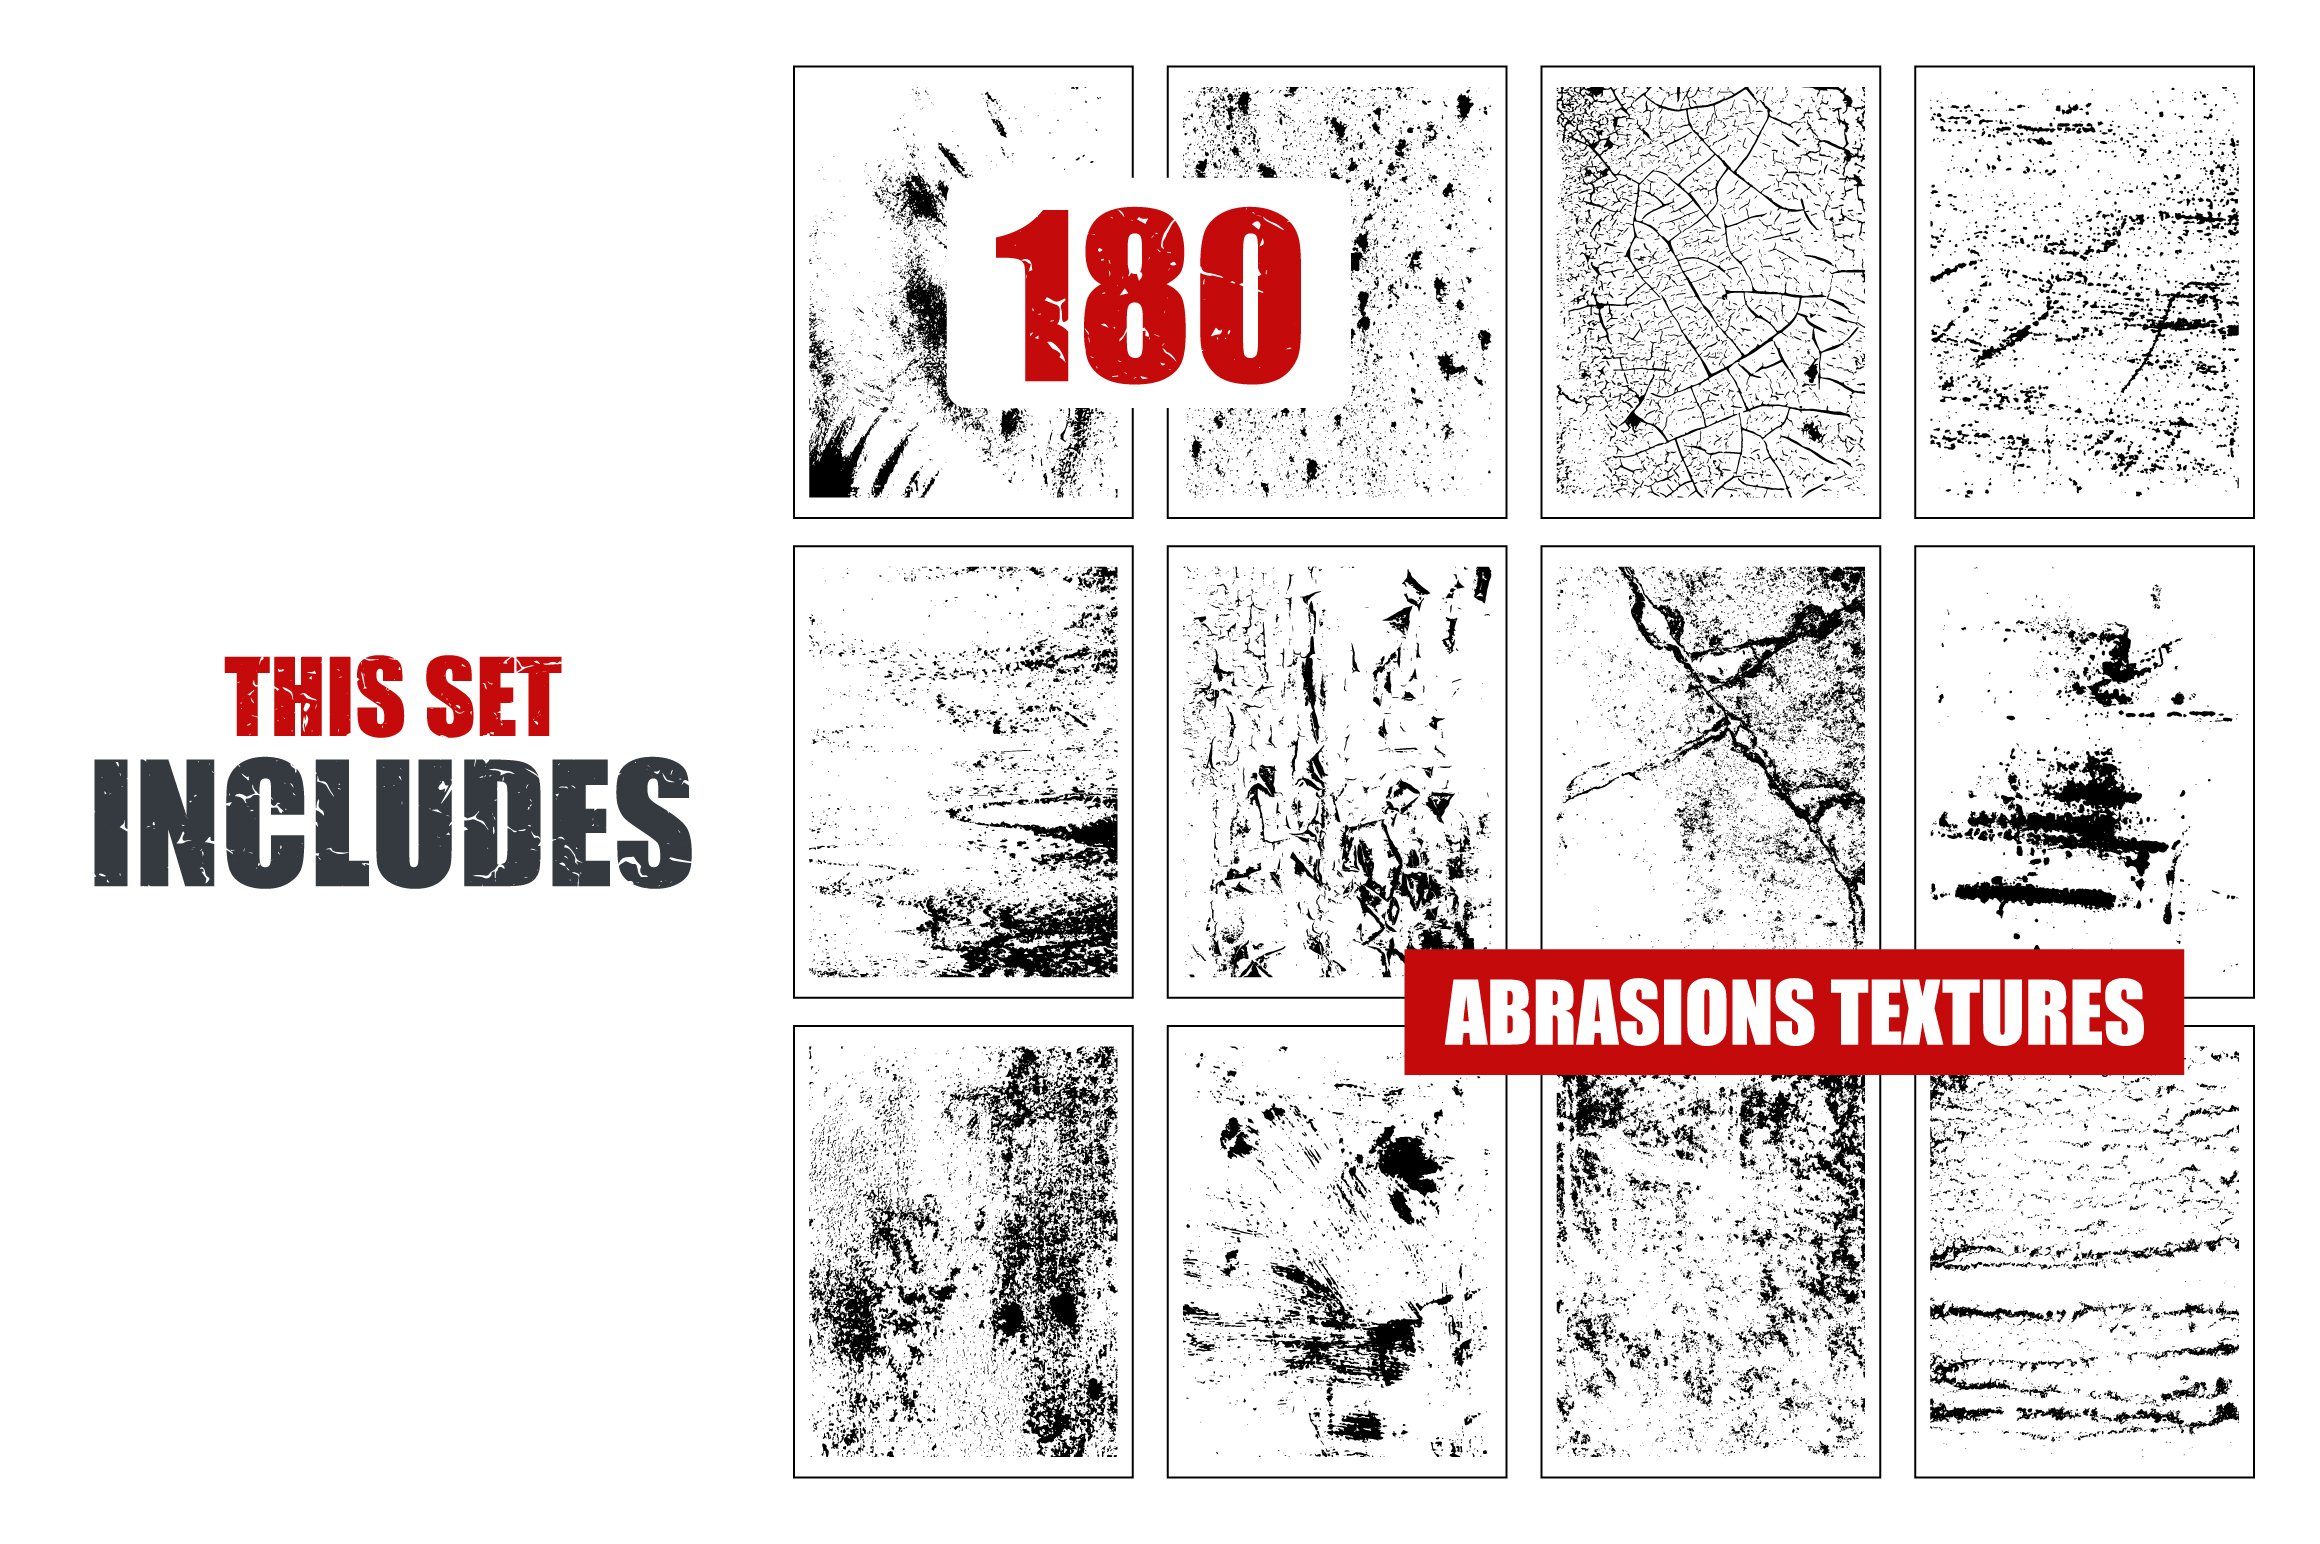 180 Abrasions Textures cover image.